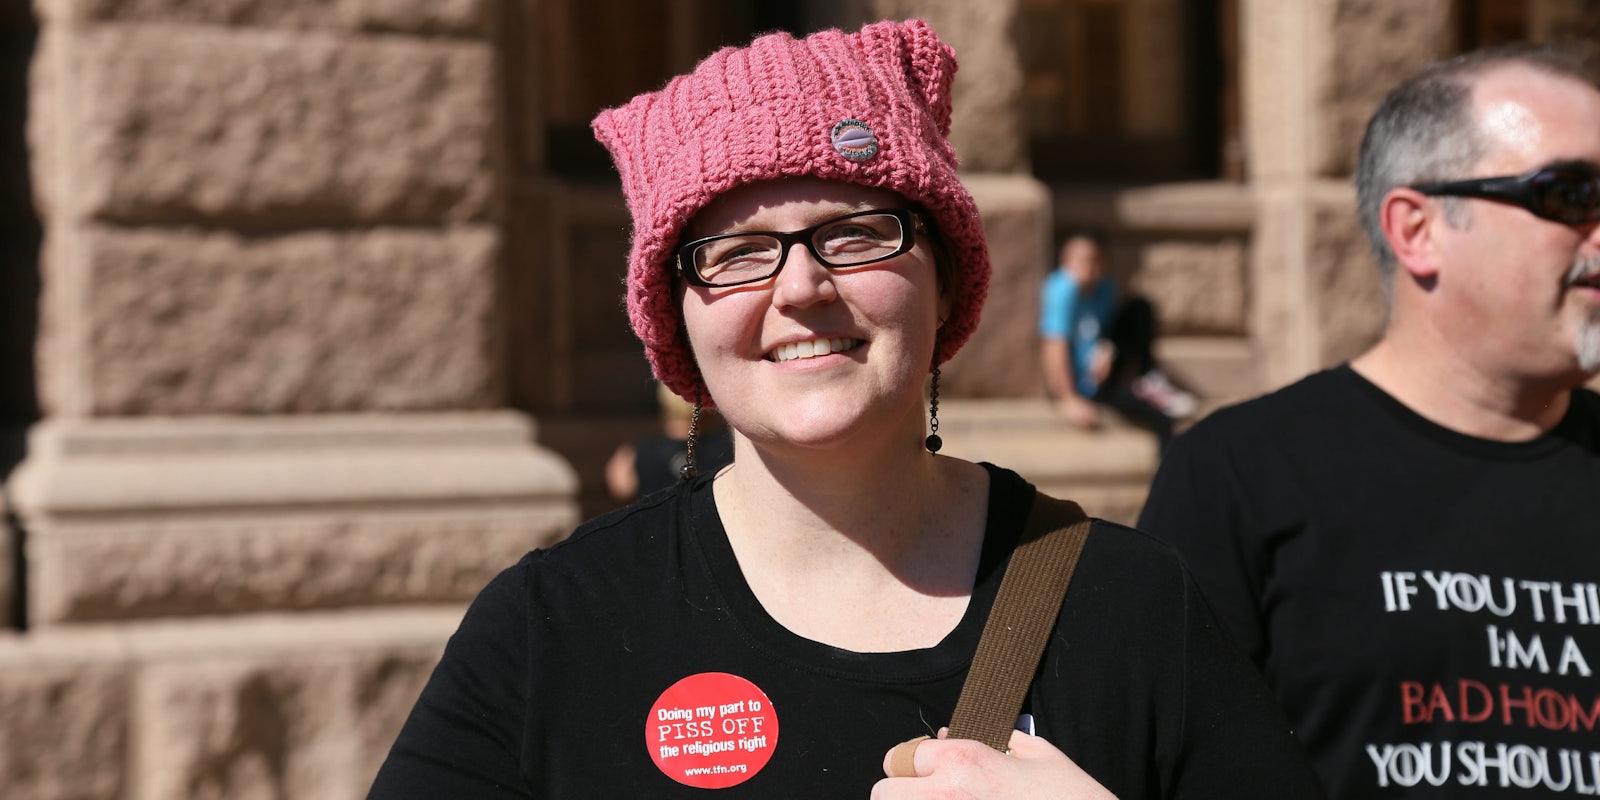 A woman wears a 'pussyhat' during a protest in Austin, Texas.